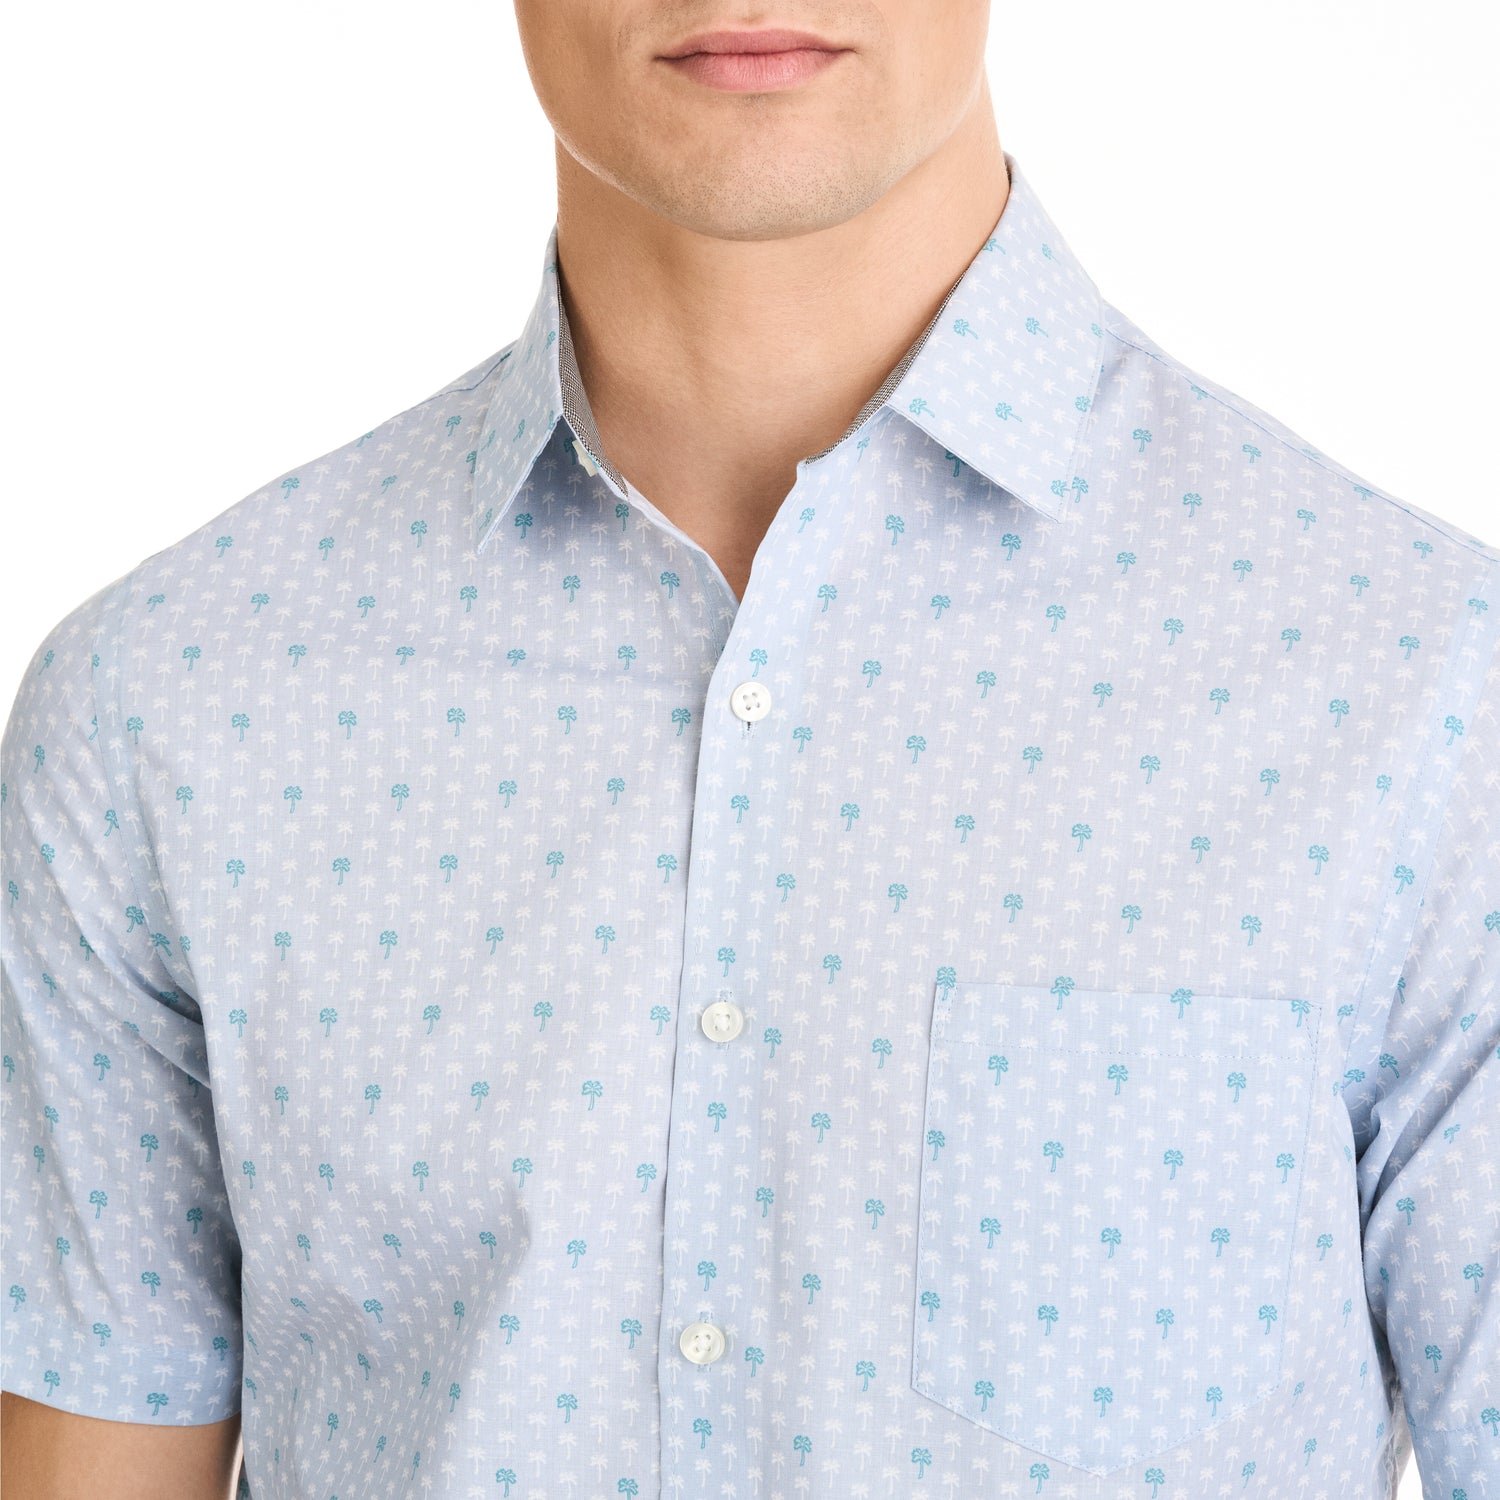 Essential Stain Shield Palm Woven Short Sleeve Shirt - Slim Fit